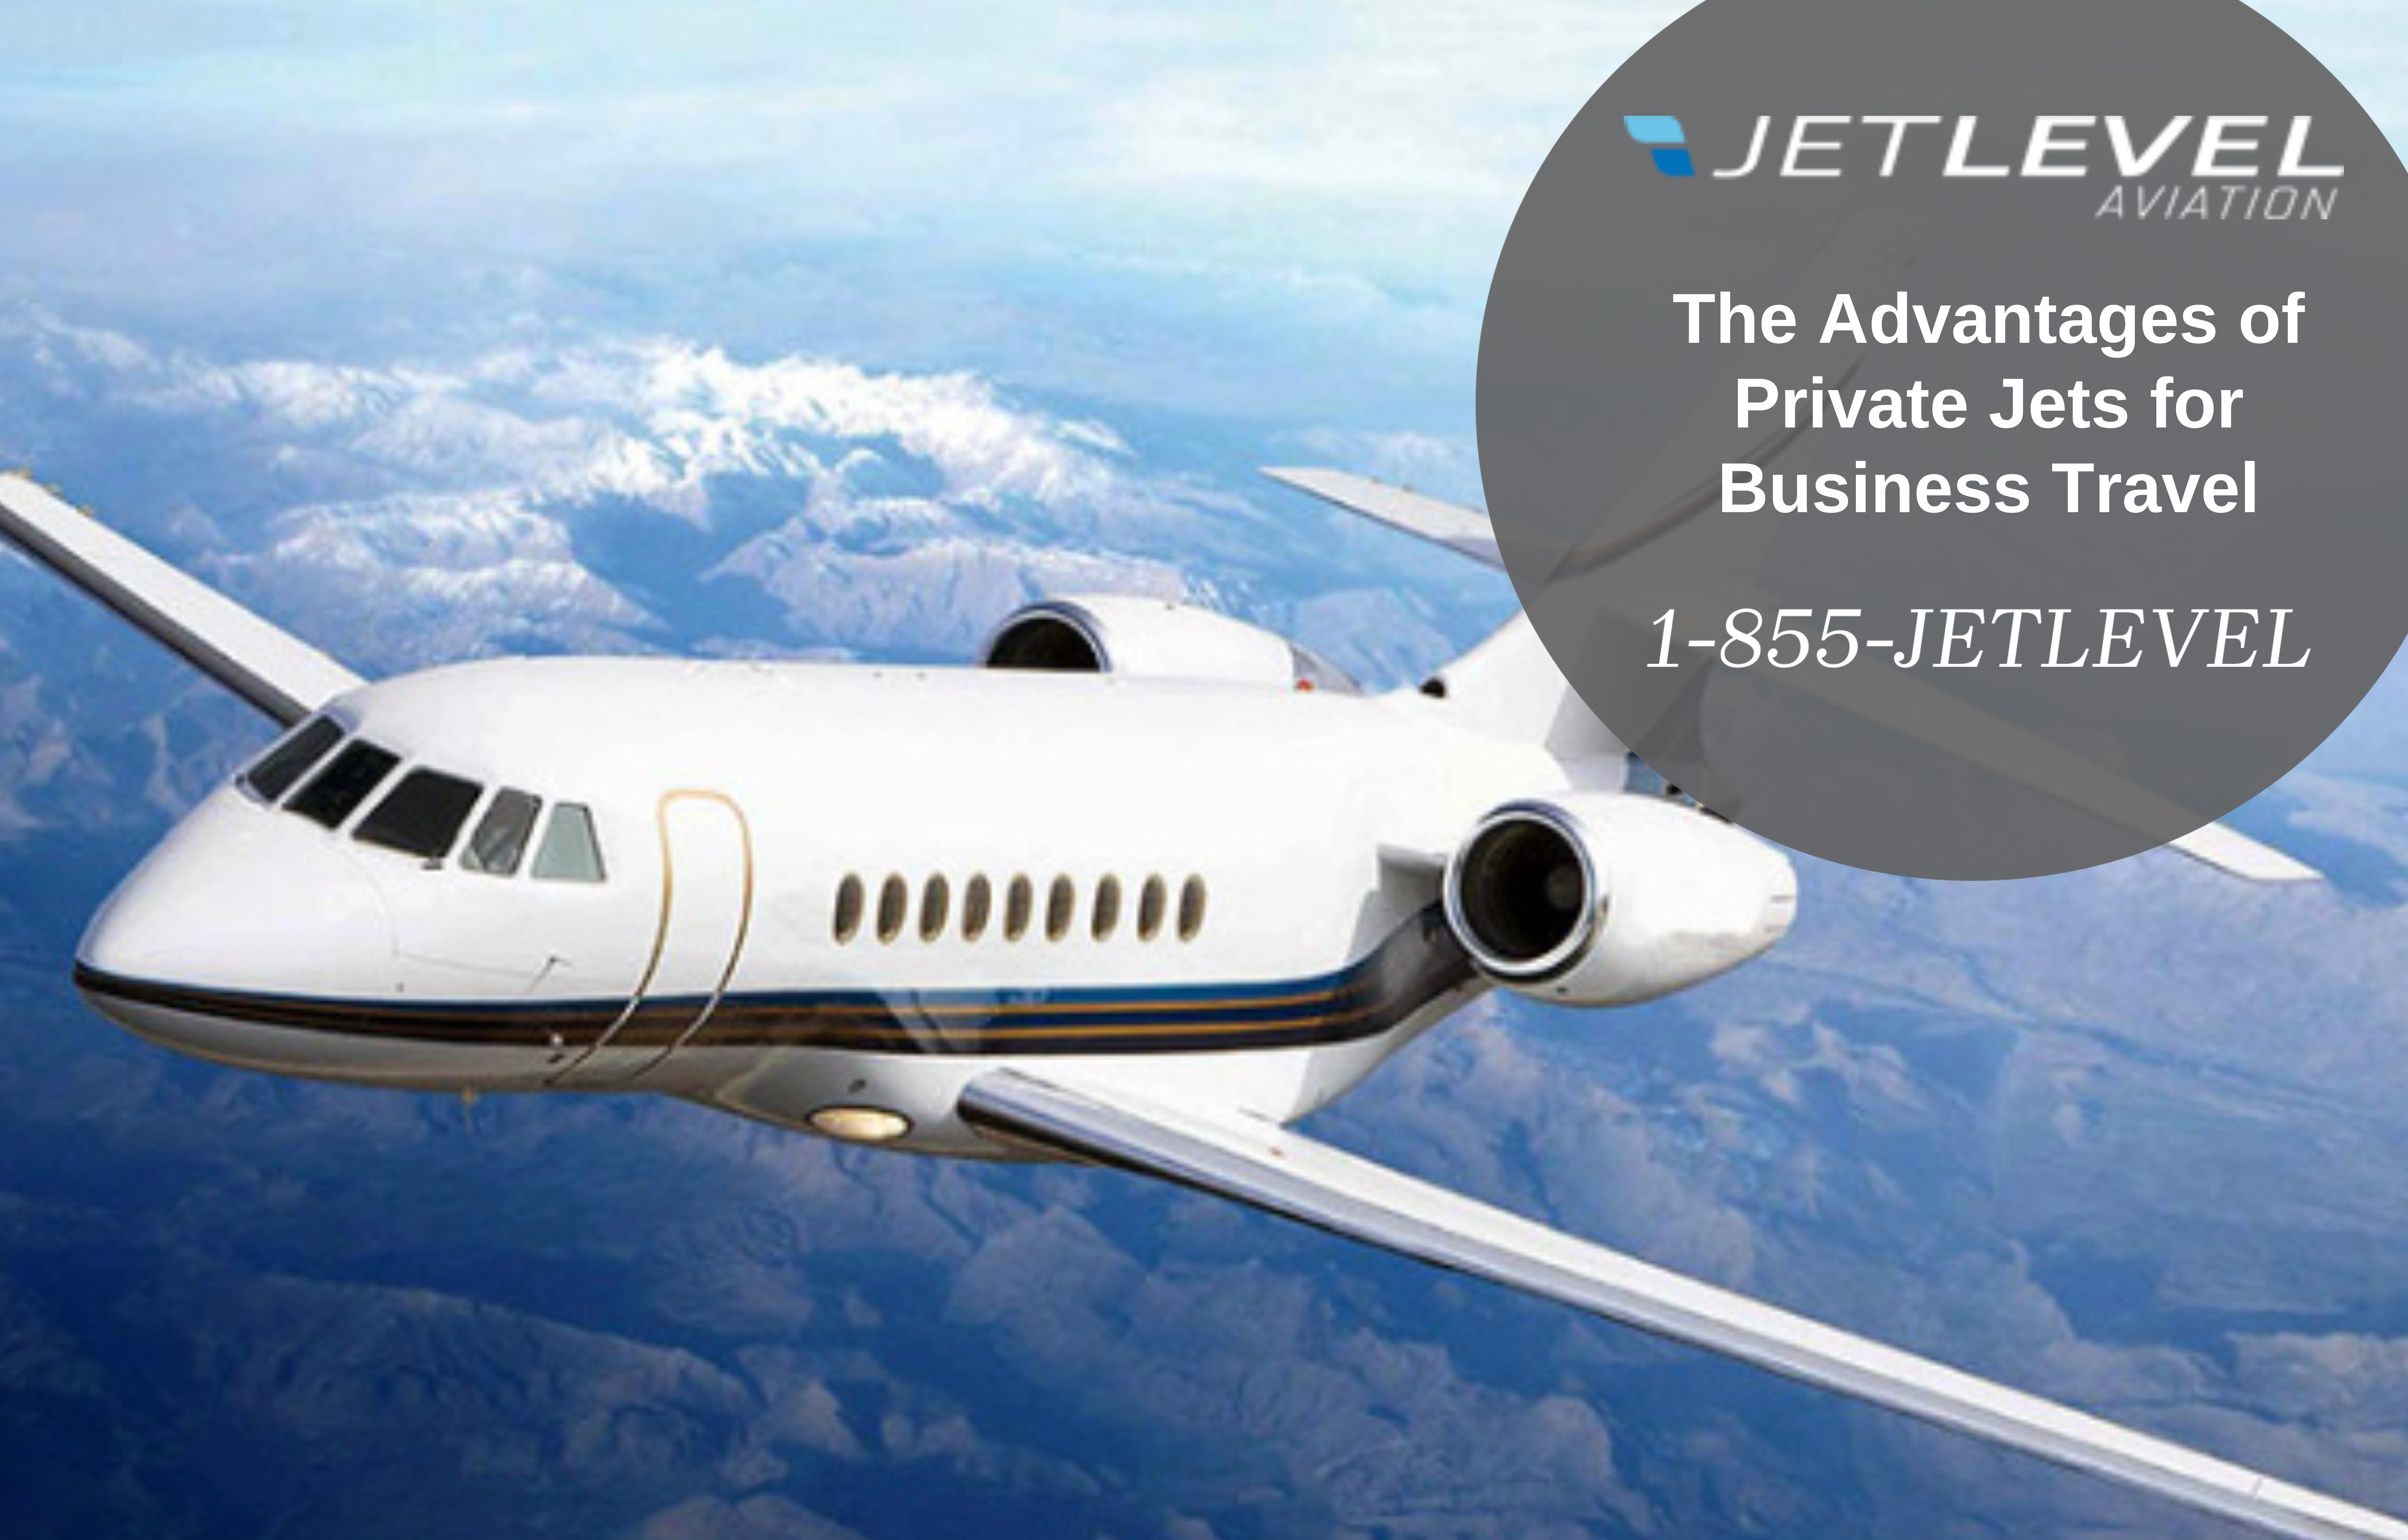 The Advantages of Private Jets for Business Travel